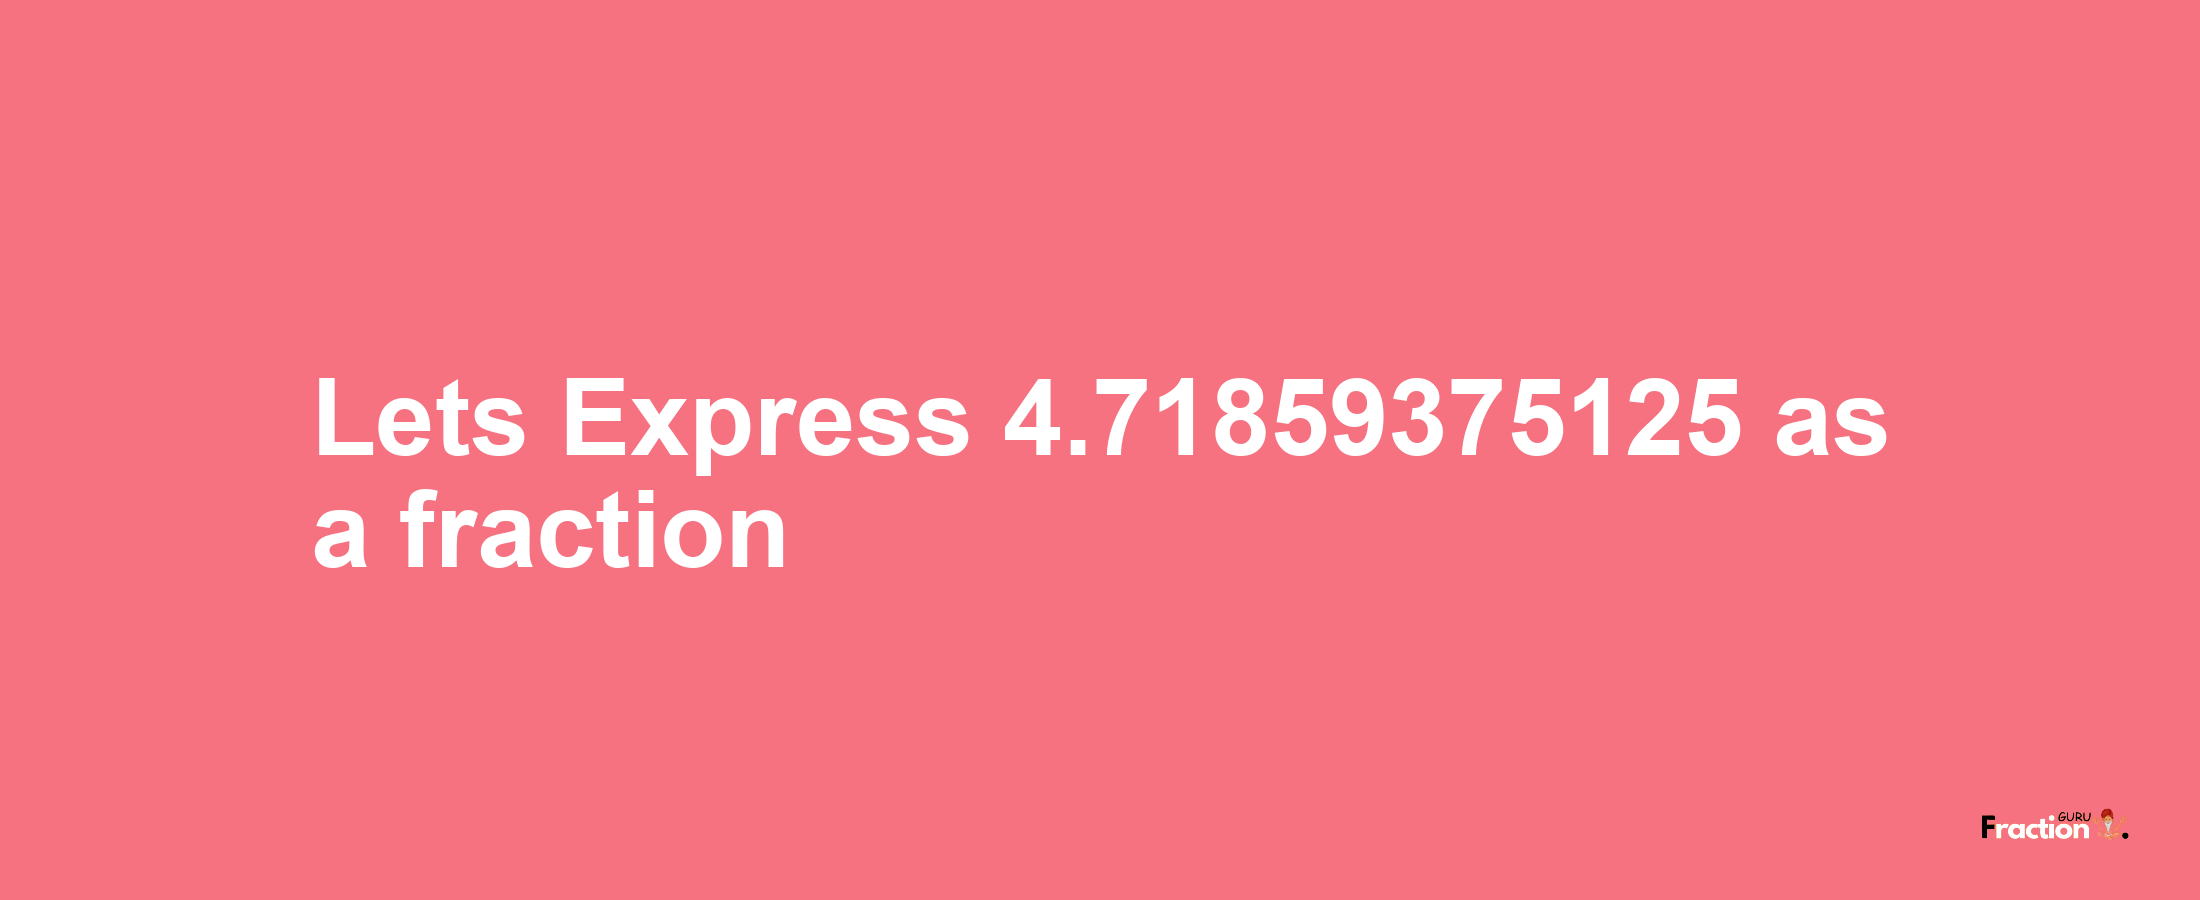 Lets Express 4.71859375125 as afraction